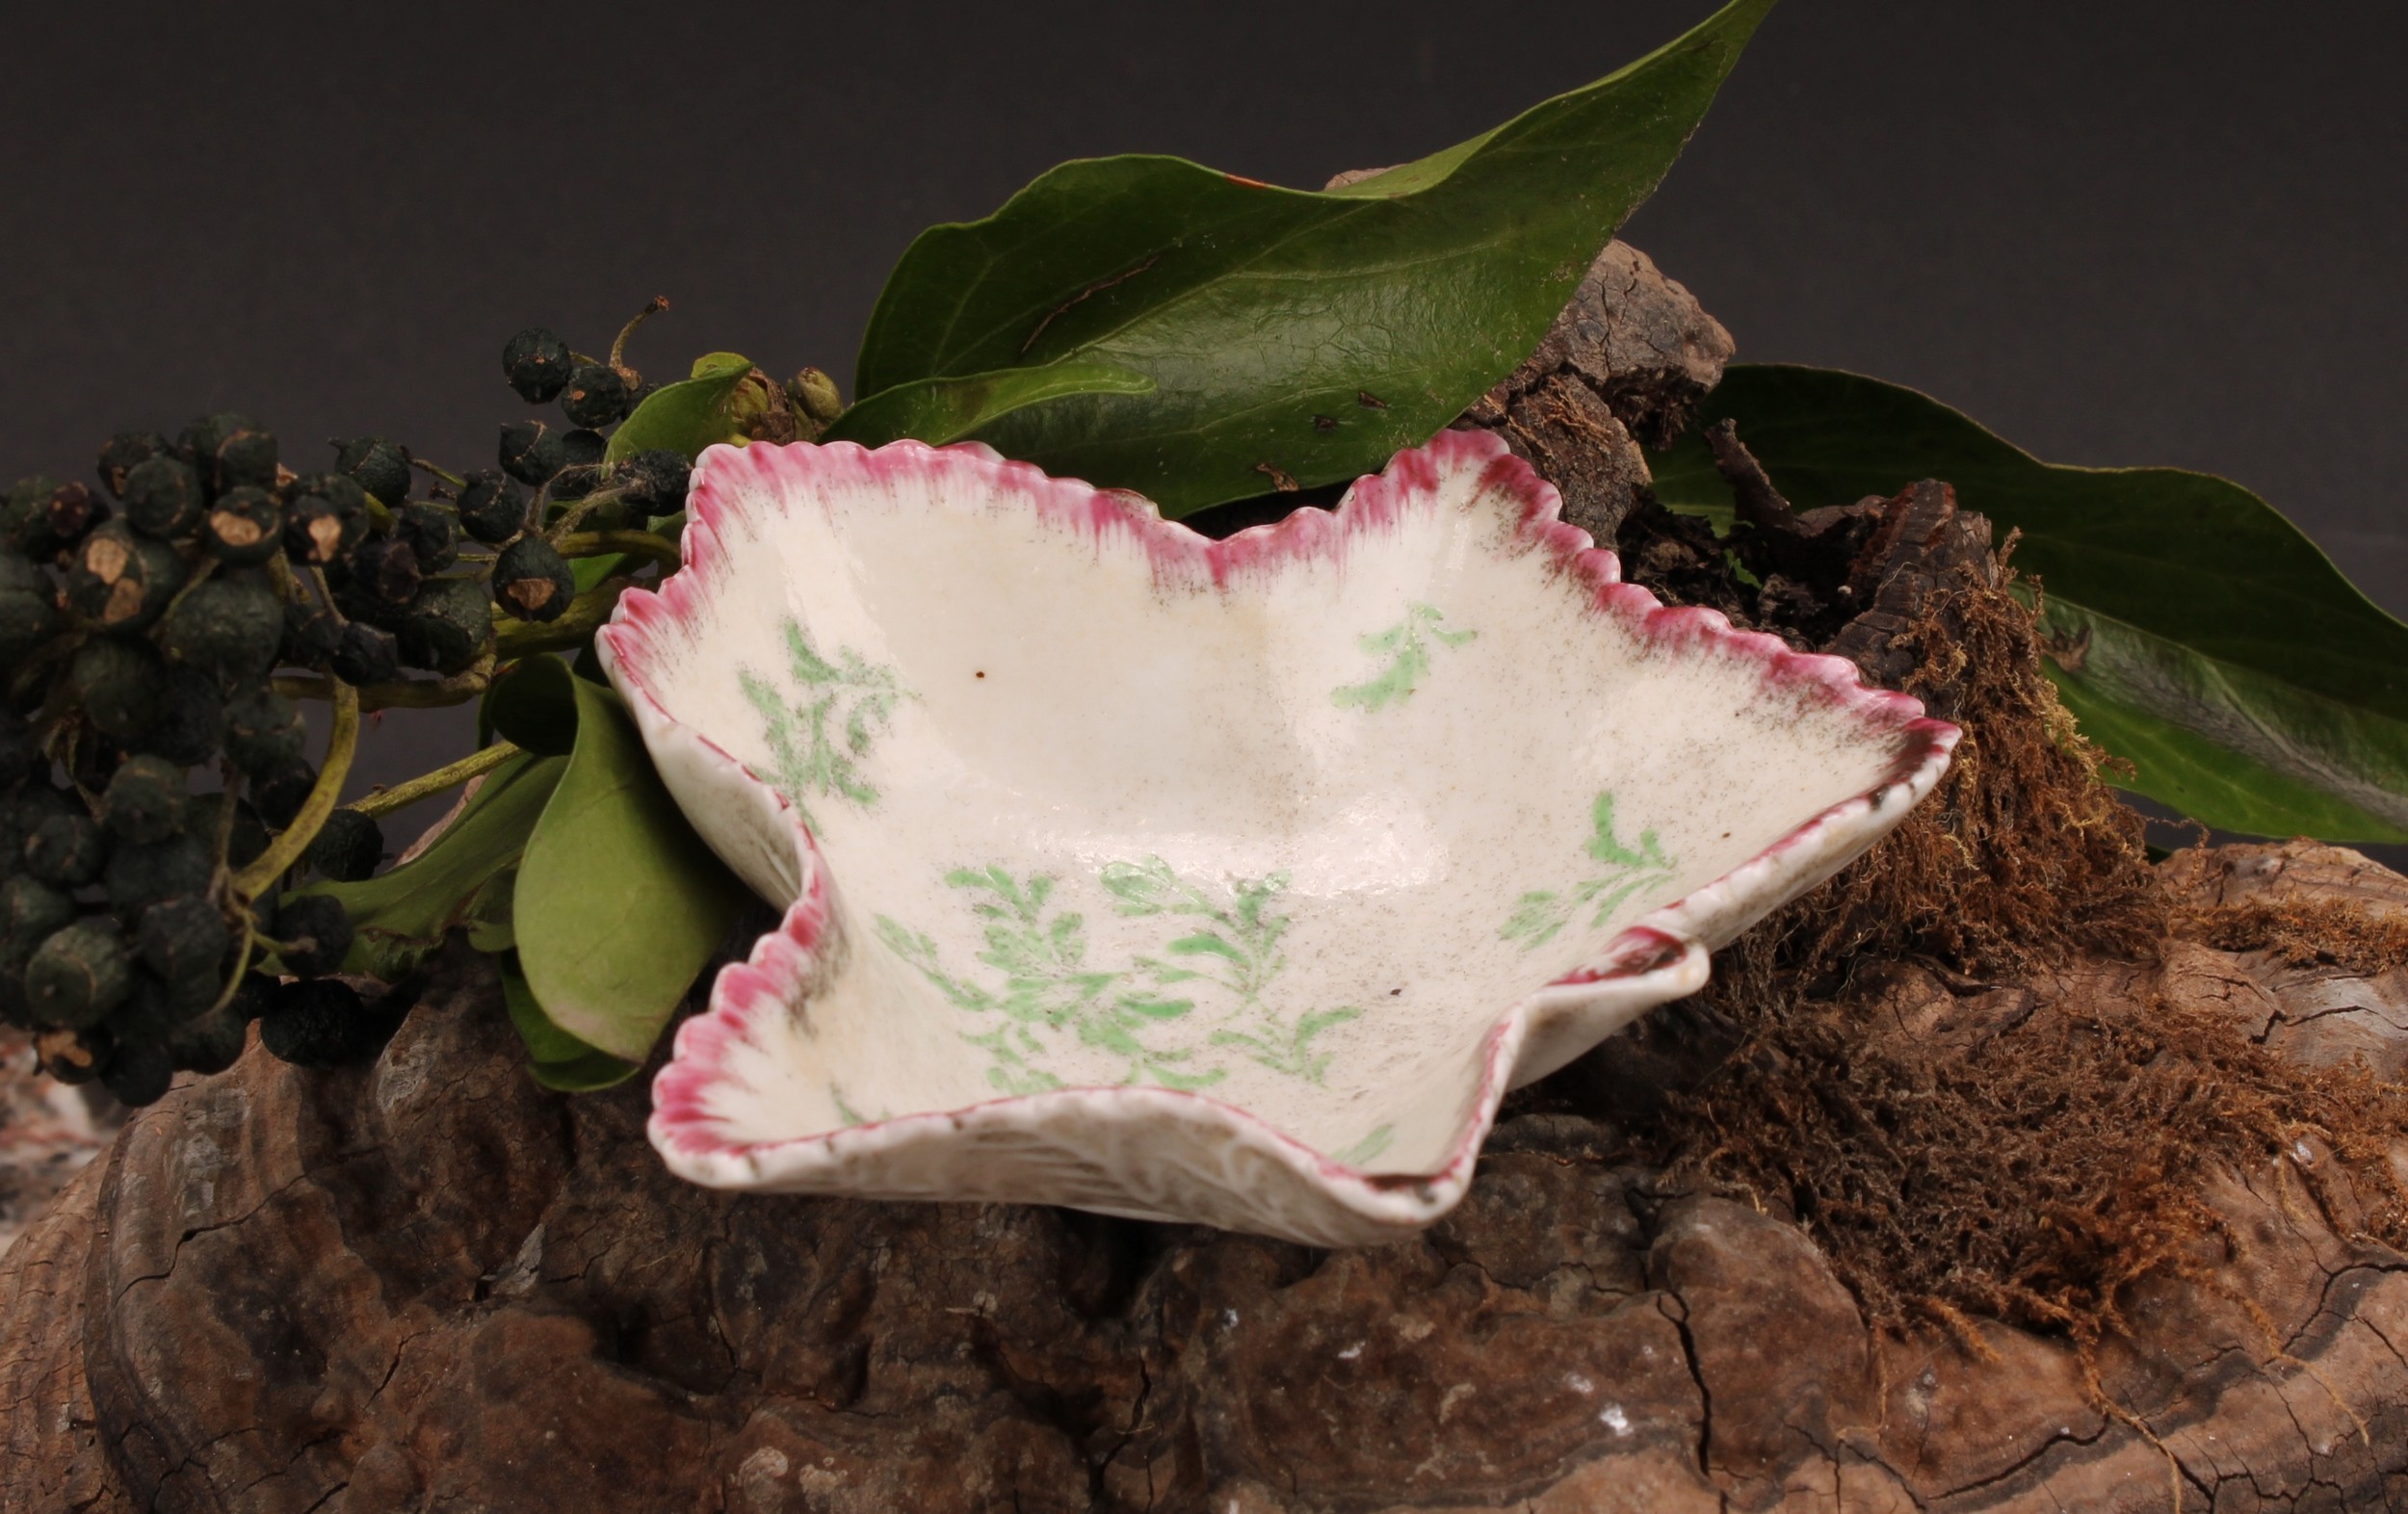 A rare early Plymouth leaf shaped pickle dish, painted in polychrome with scattered green leaves